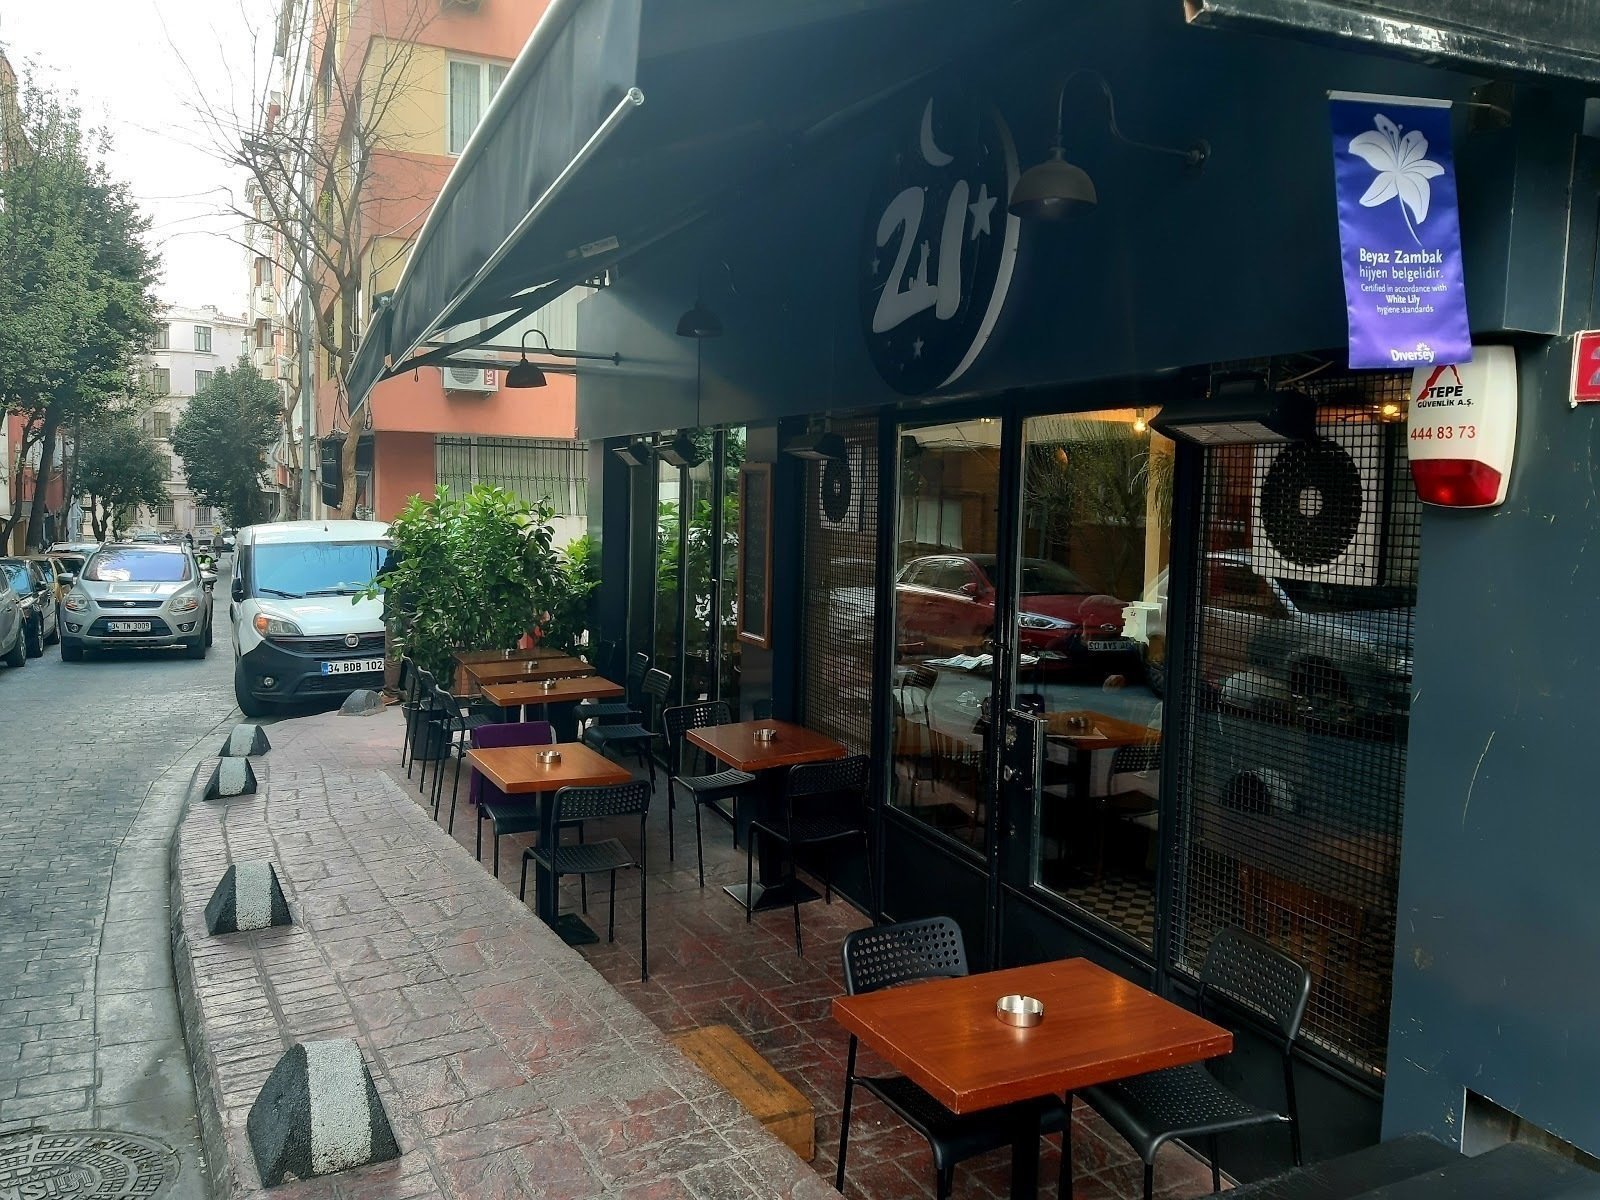 <span class="translation_missing" title="translation missing: en.meta.location_title, location_name: Cafe 21, city: Istanbul">Location Title</span>